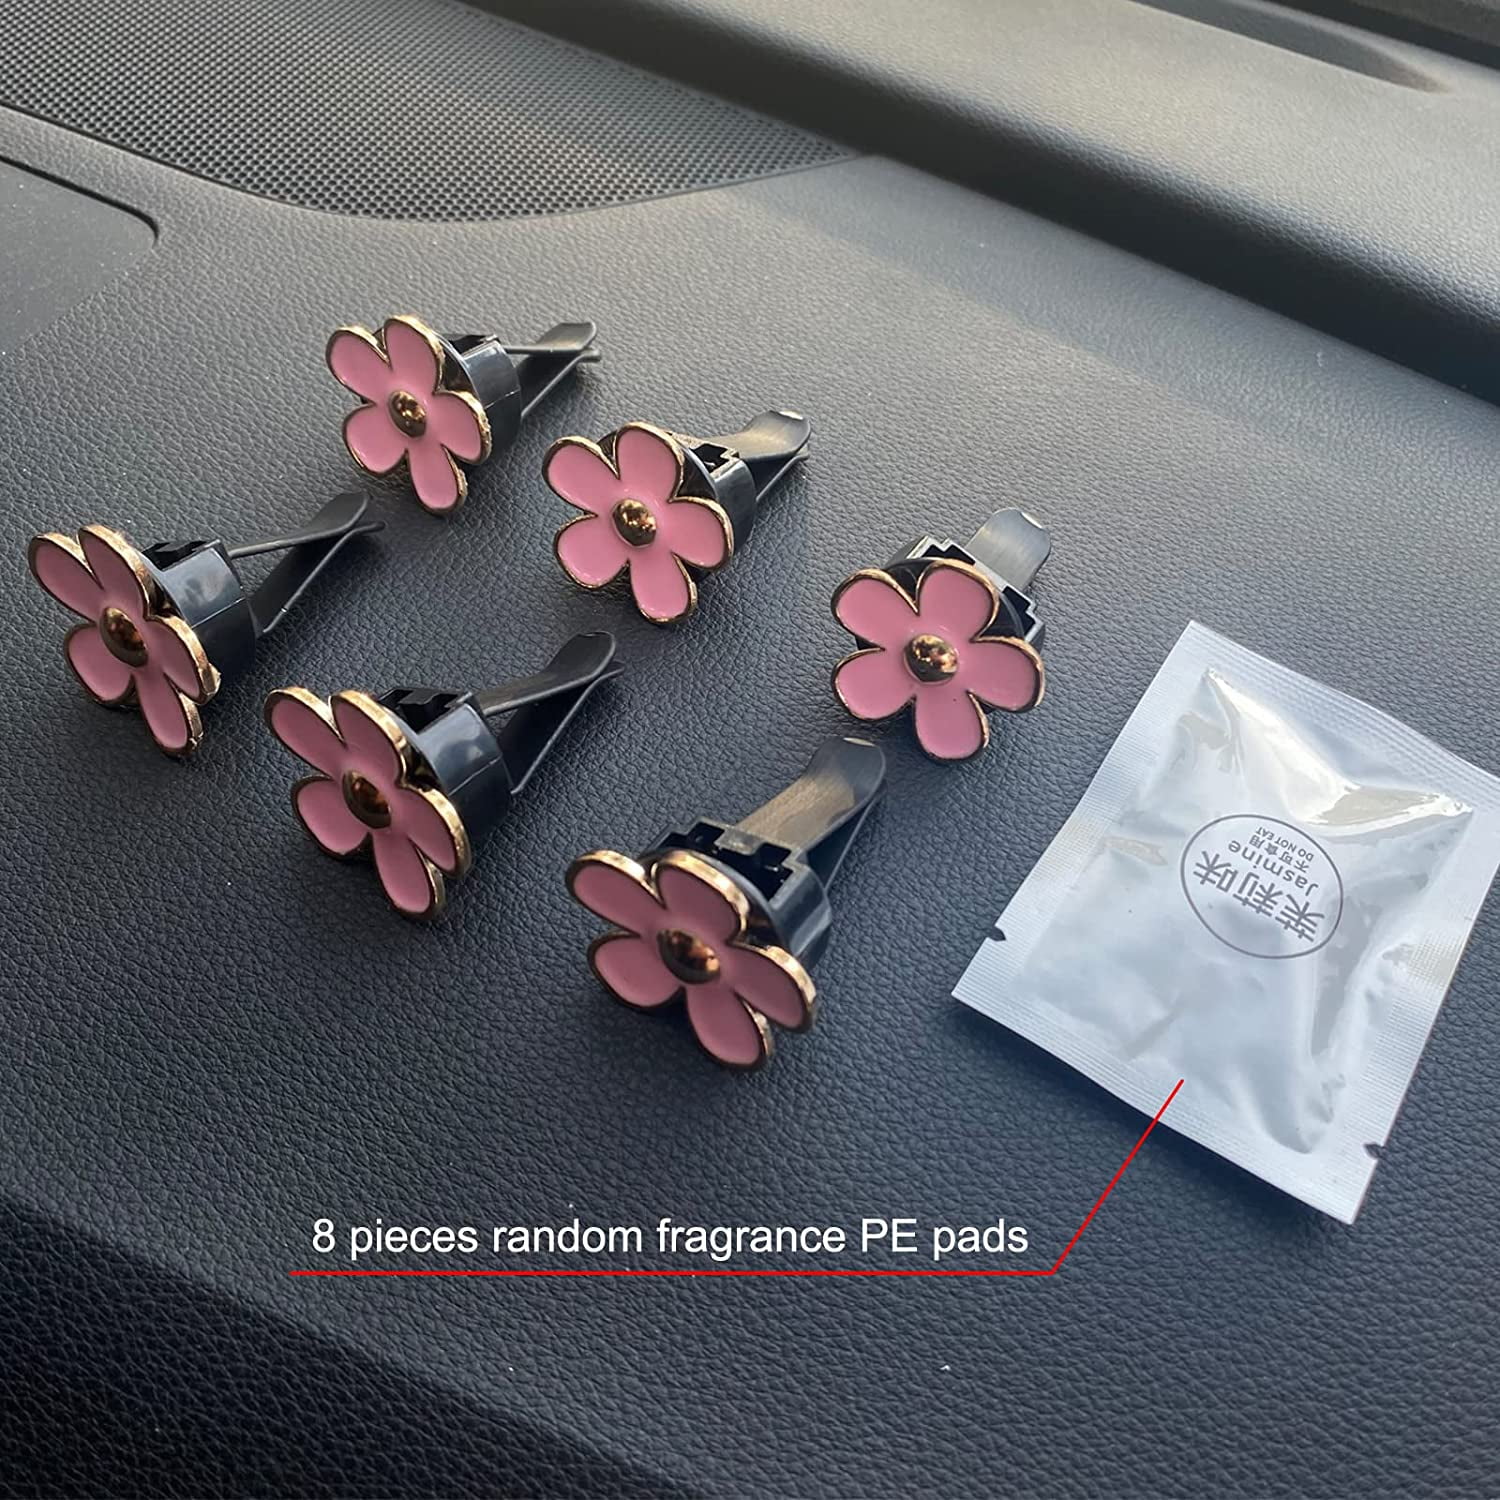 6 Pieces Flowers Car Air Vent Clips with Fragrance Pads Colorful Daisy  Flower Car Air Freshener Groovy Retro Hippie Flowers Air Vent Decorations  Cute